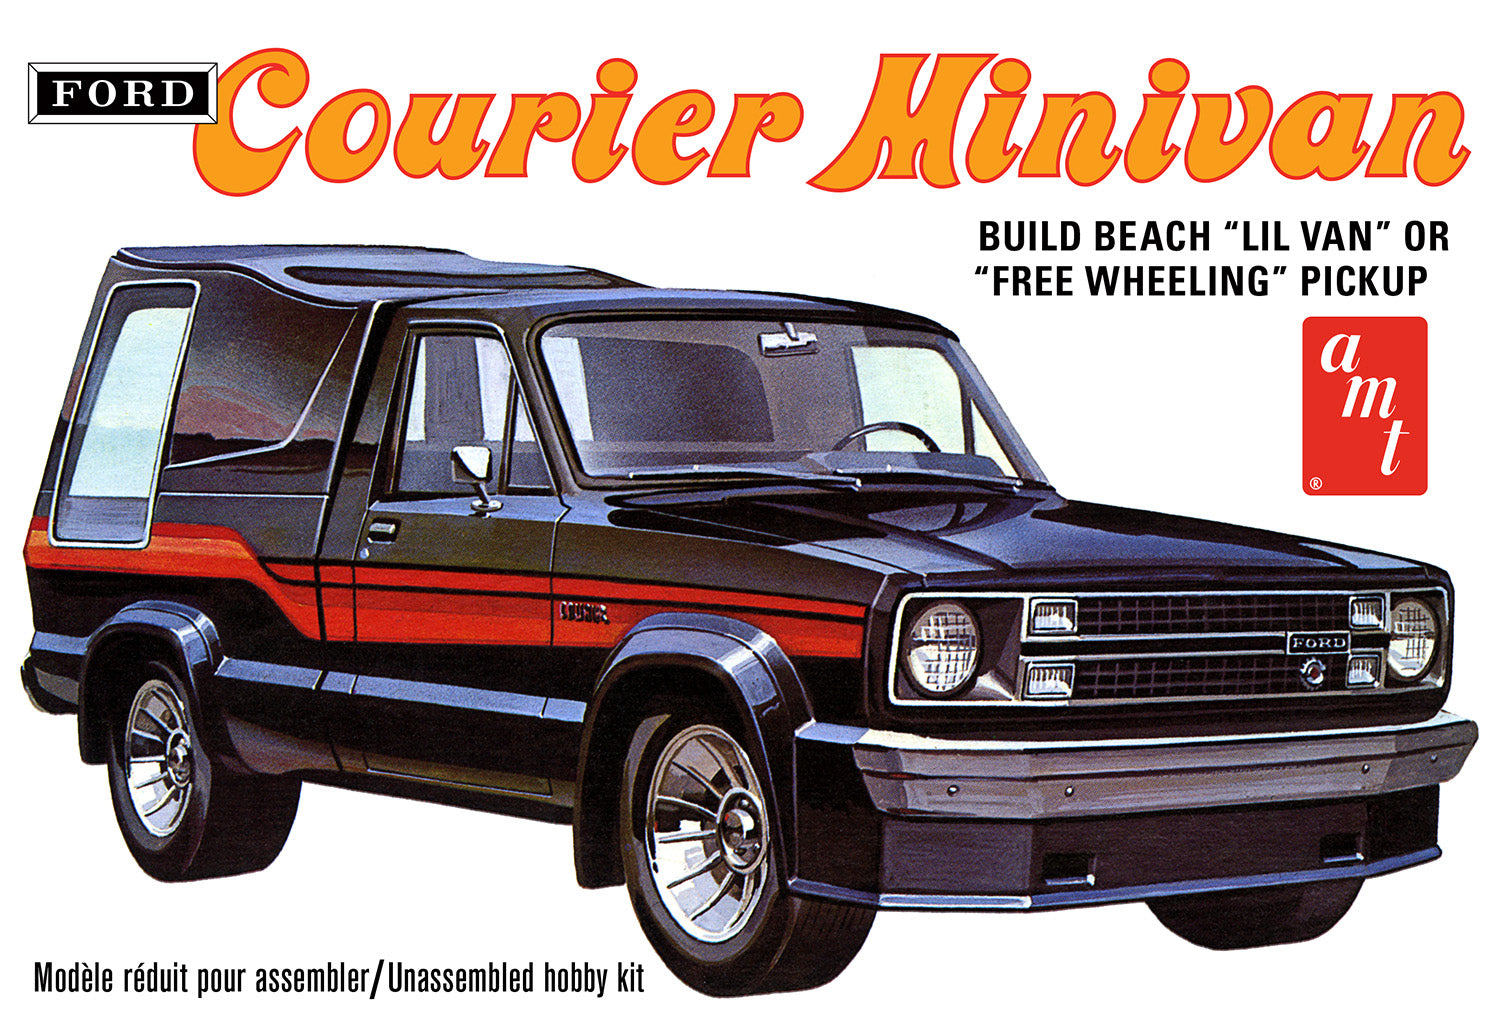 AMT 1978 Ford Courier Minivan 1:25 Scale Model Kit